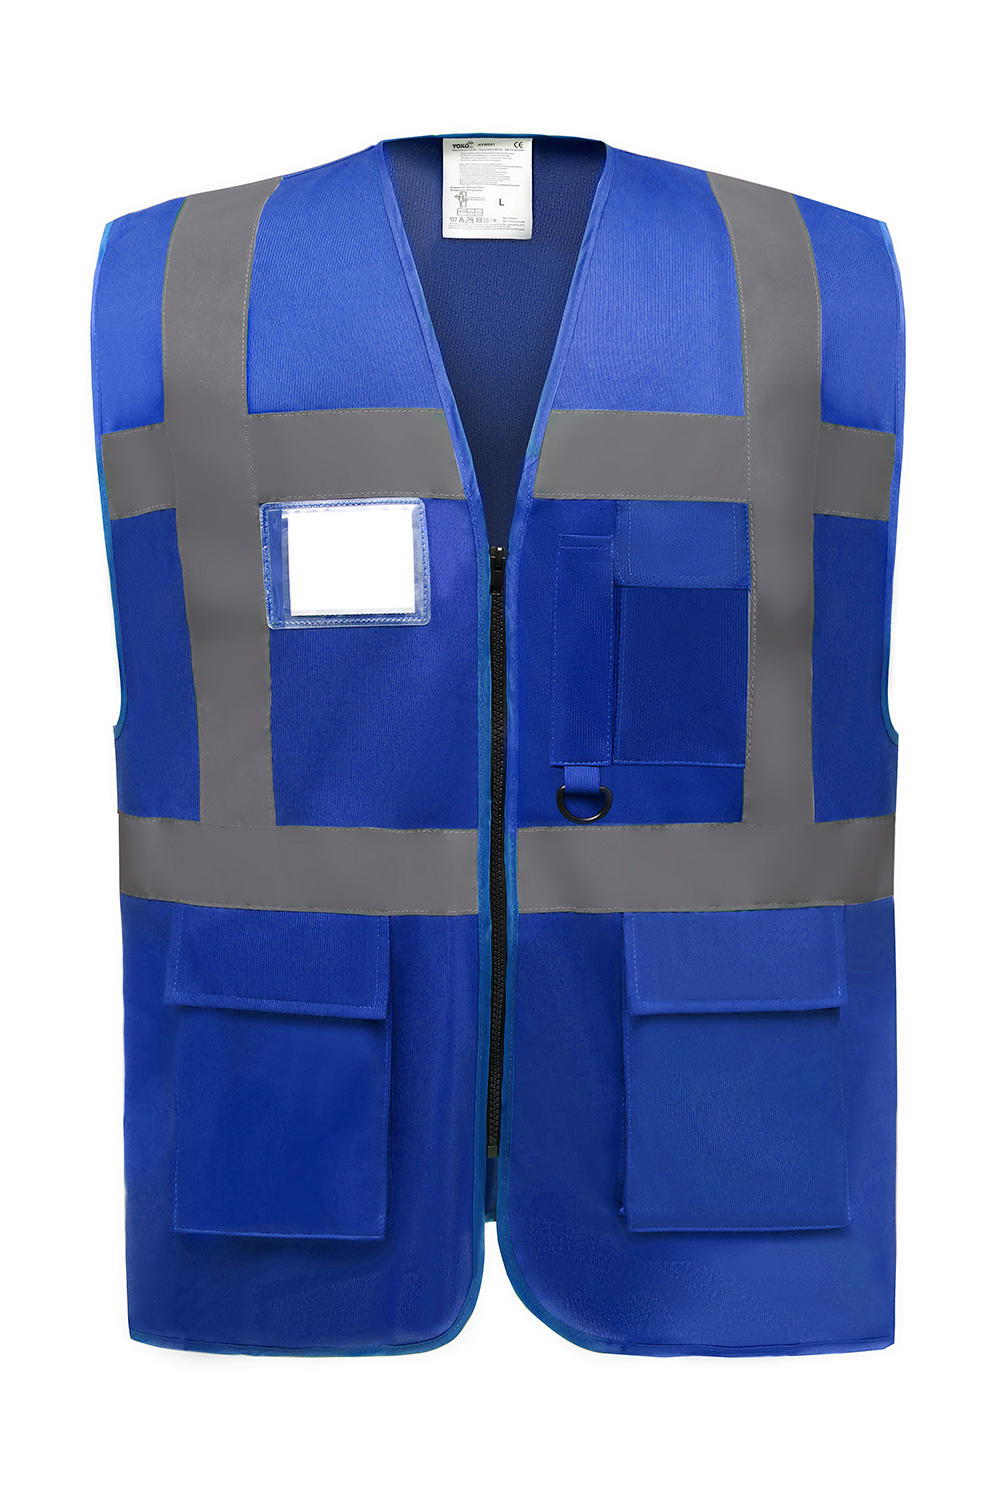  Fluo Executive Waistcoat in Farbe Royal Blue